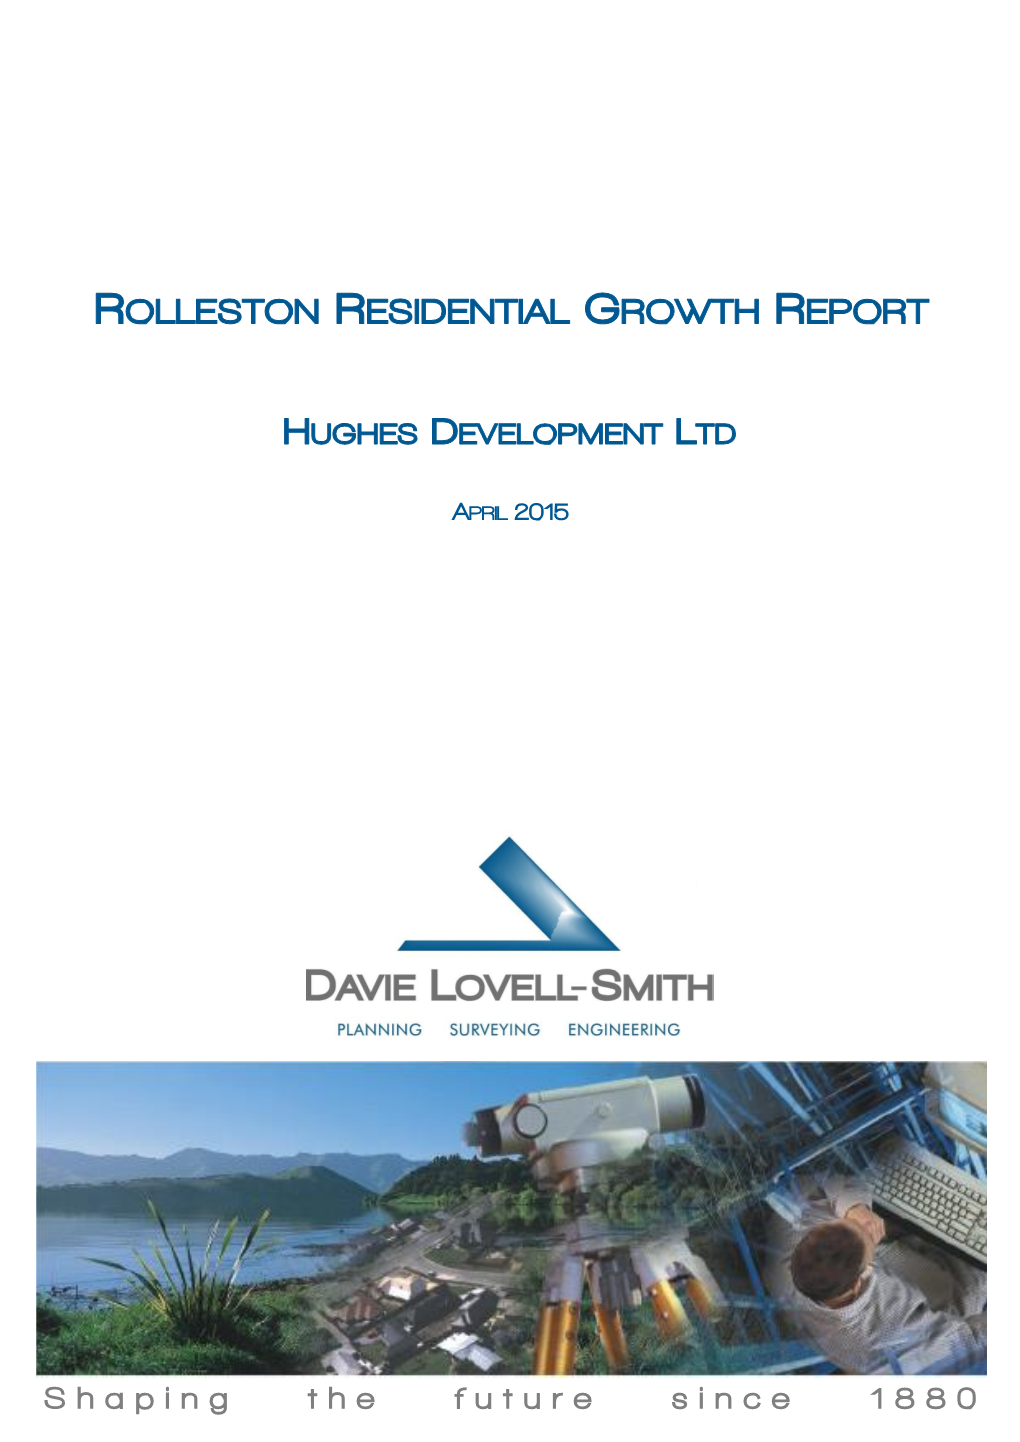 Rolleston Residential Growth Report